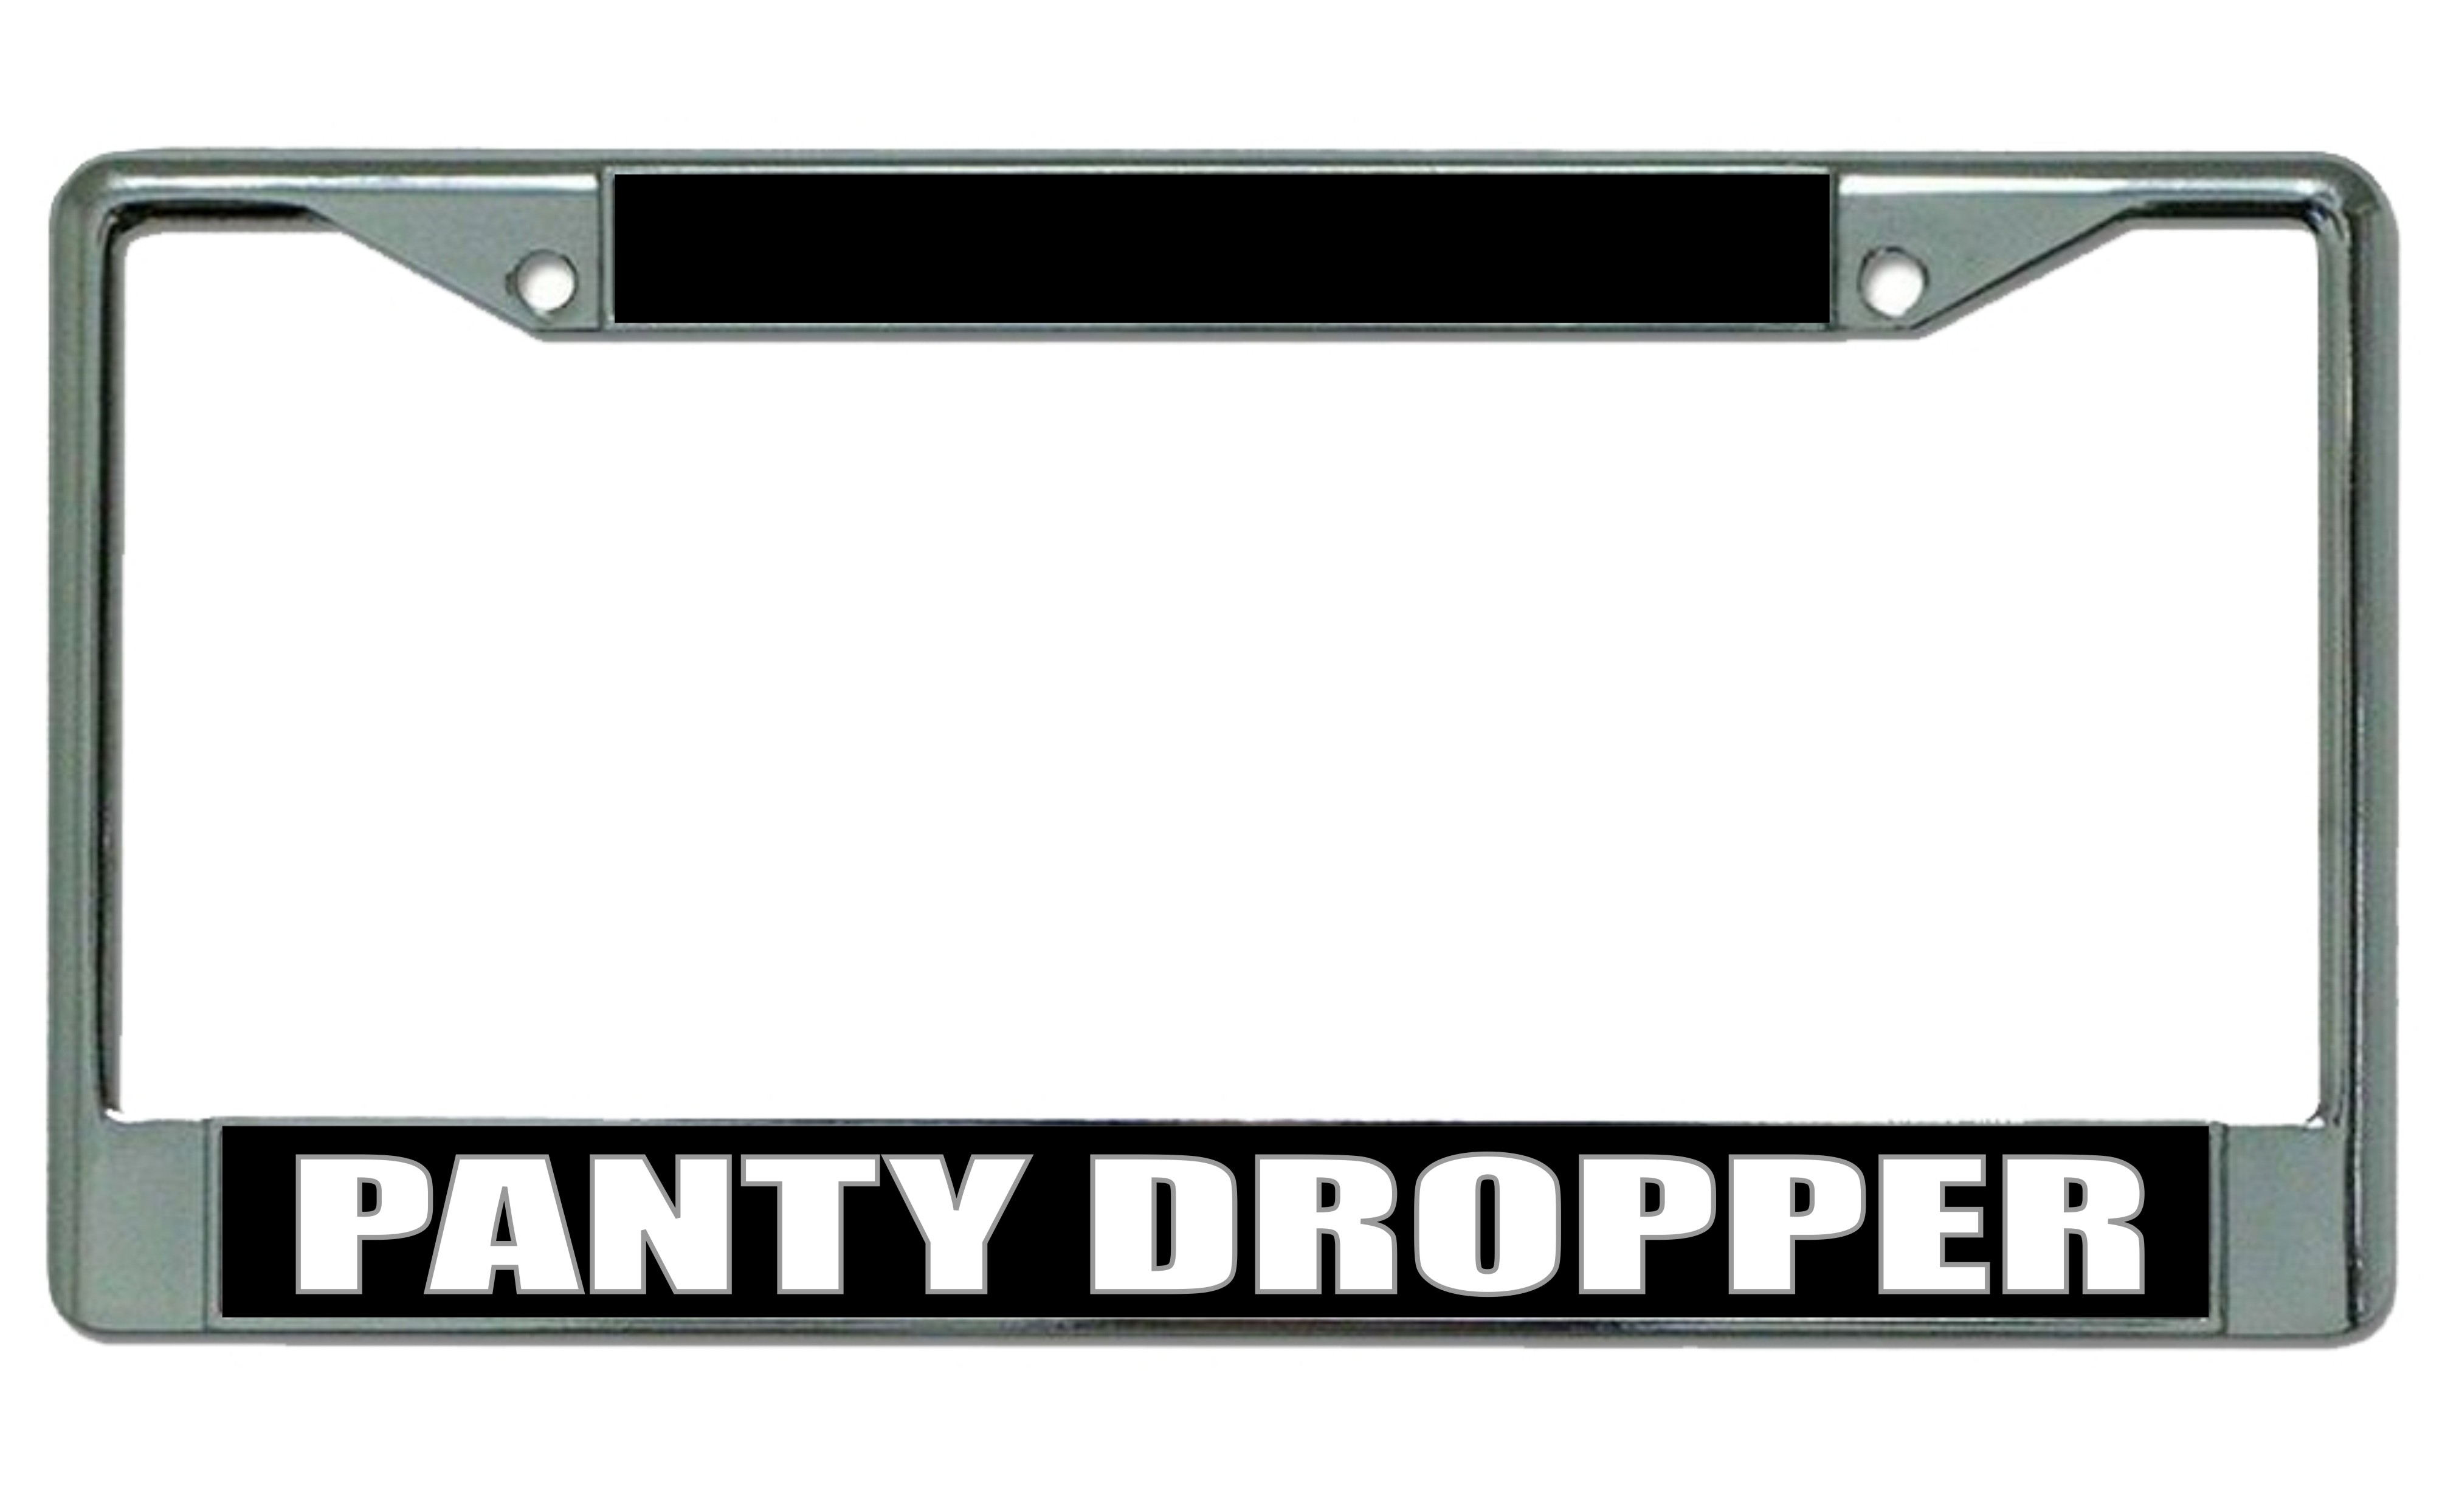 Panty Dropper Photo License Plate Frame  Free SCREW Caps with this Frame